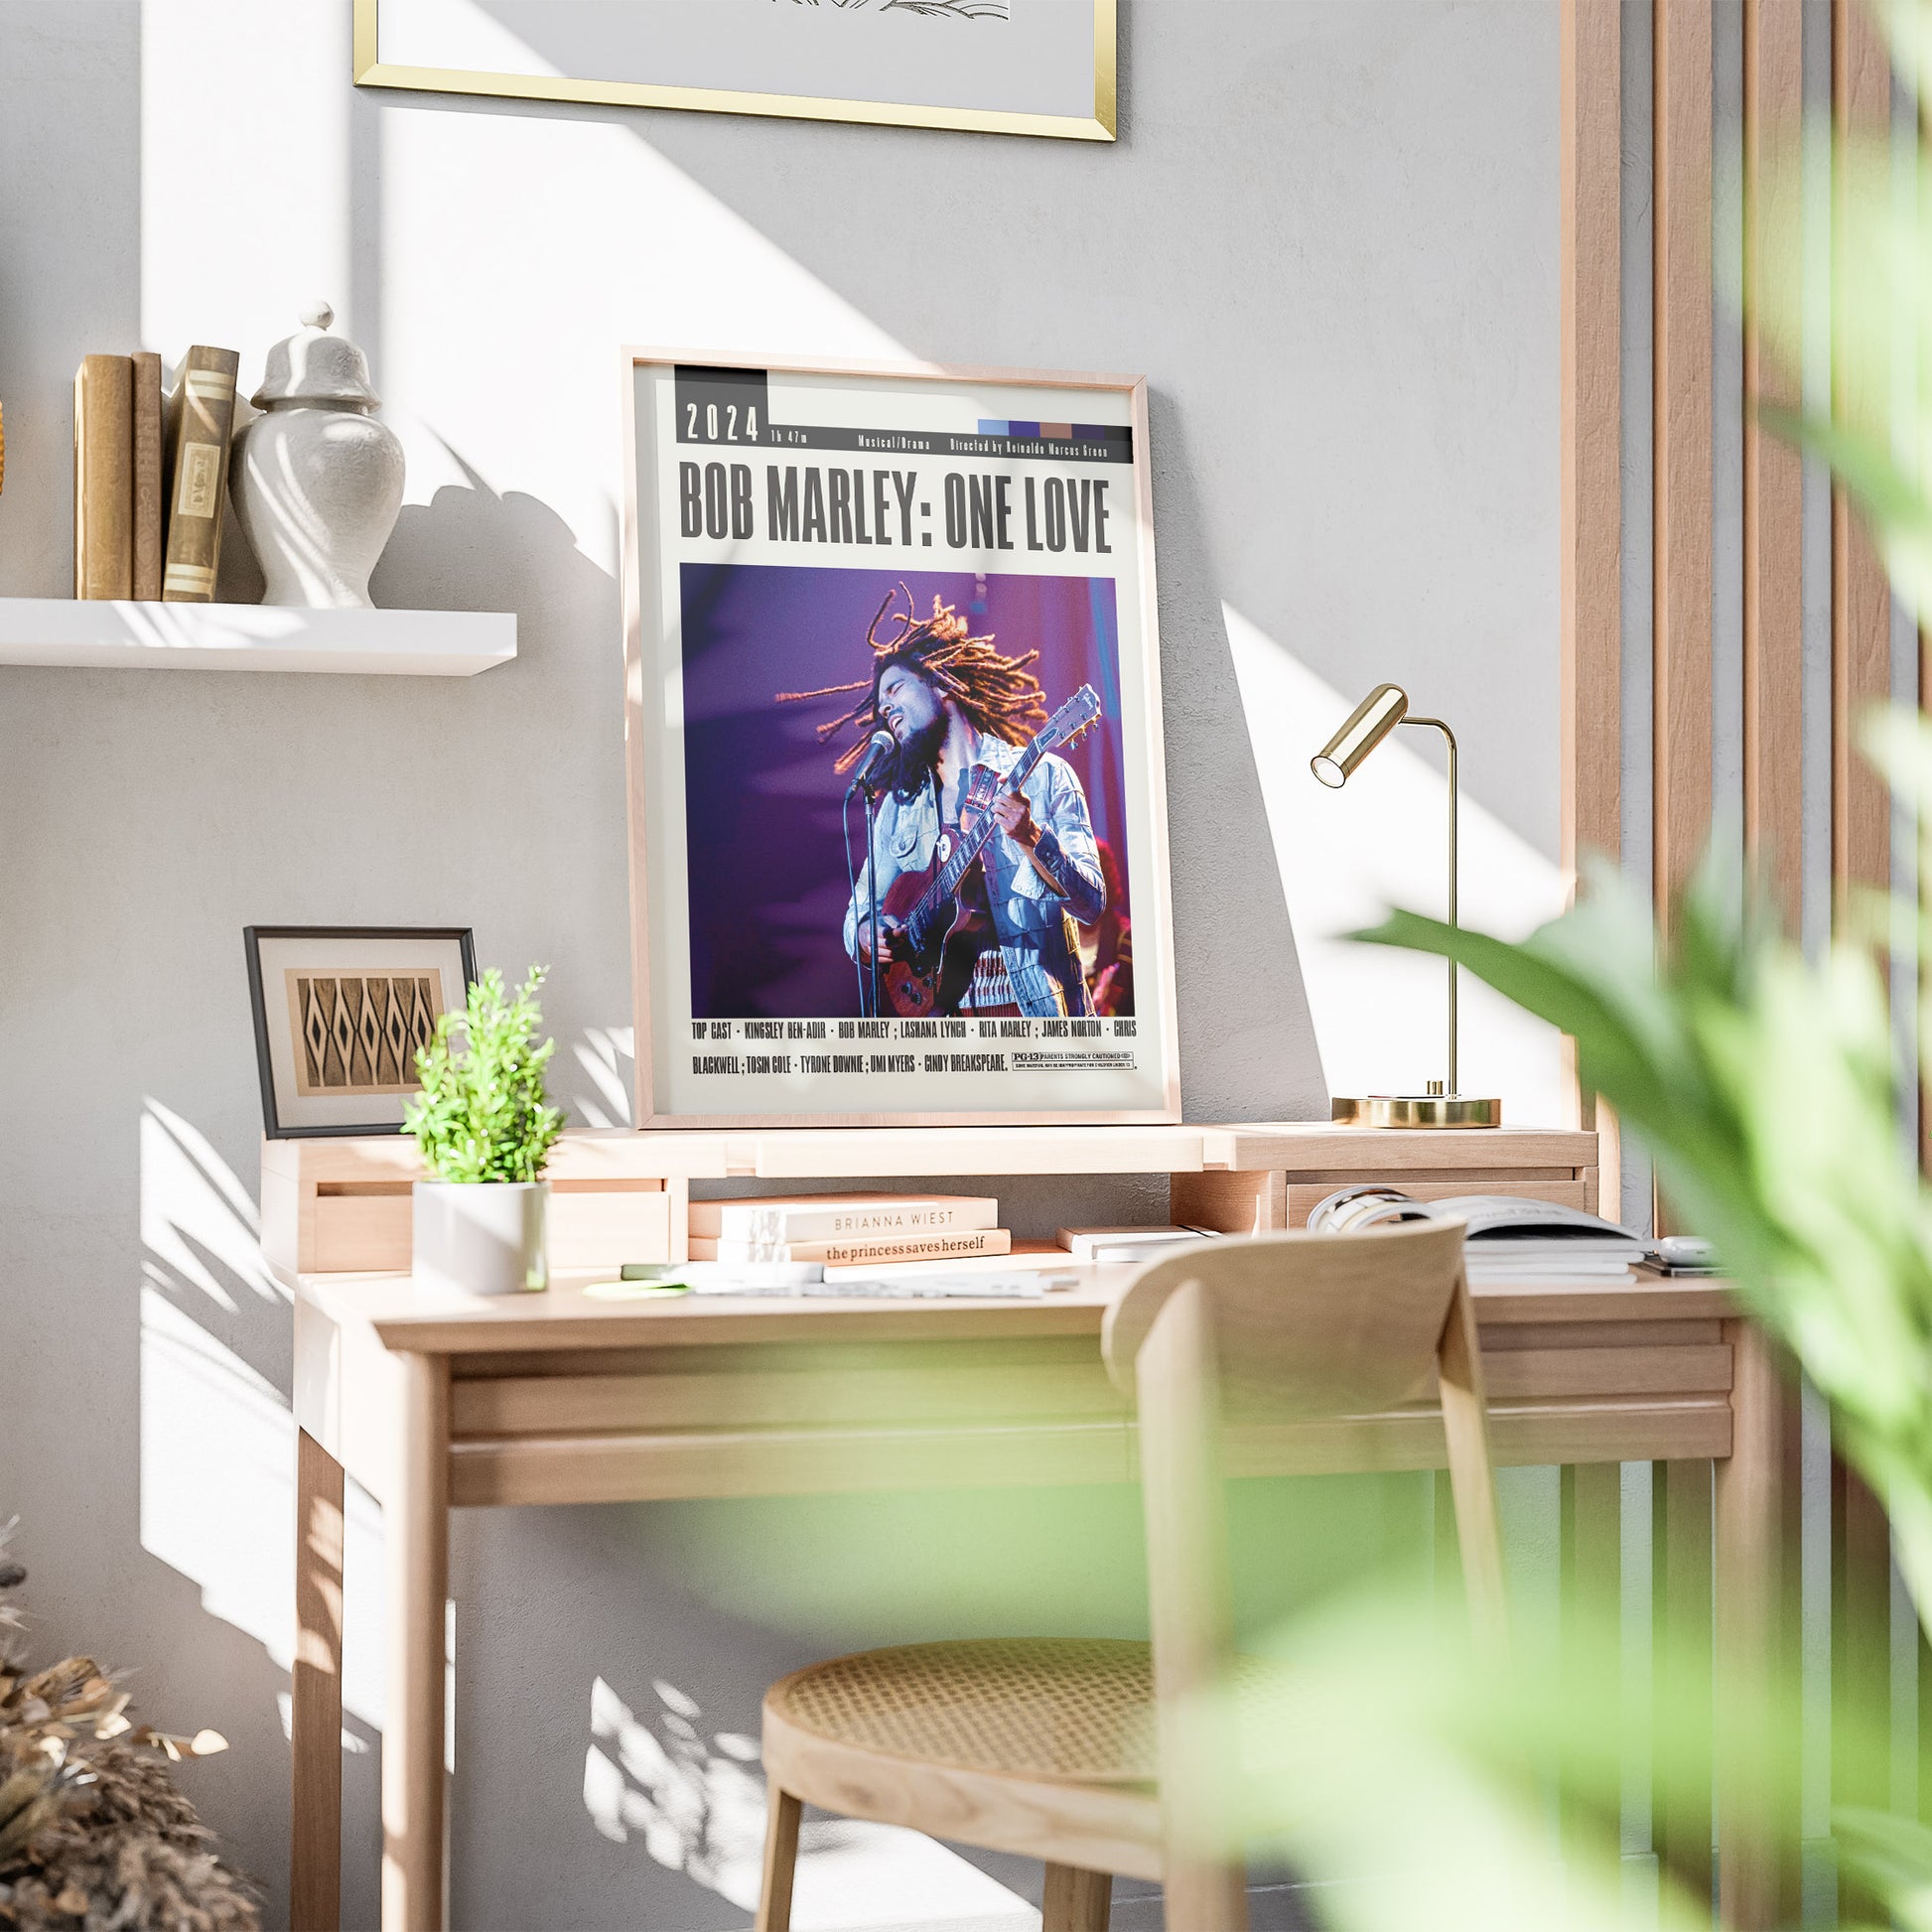 Discover the iconic Bob Marley One Love Movie Posters, featuring vivid designs and striking imagery. These posters are perfect for fans of Bob Marley and make for a great addition to any room. Made with high-quality materials, these posters are a must-have for any music lover or poster collector.